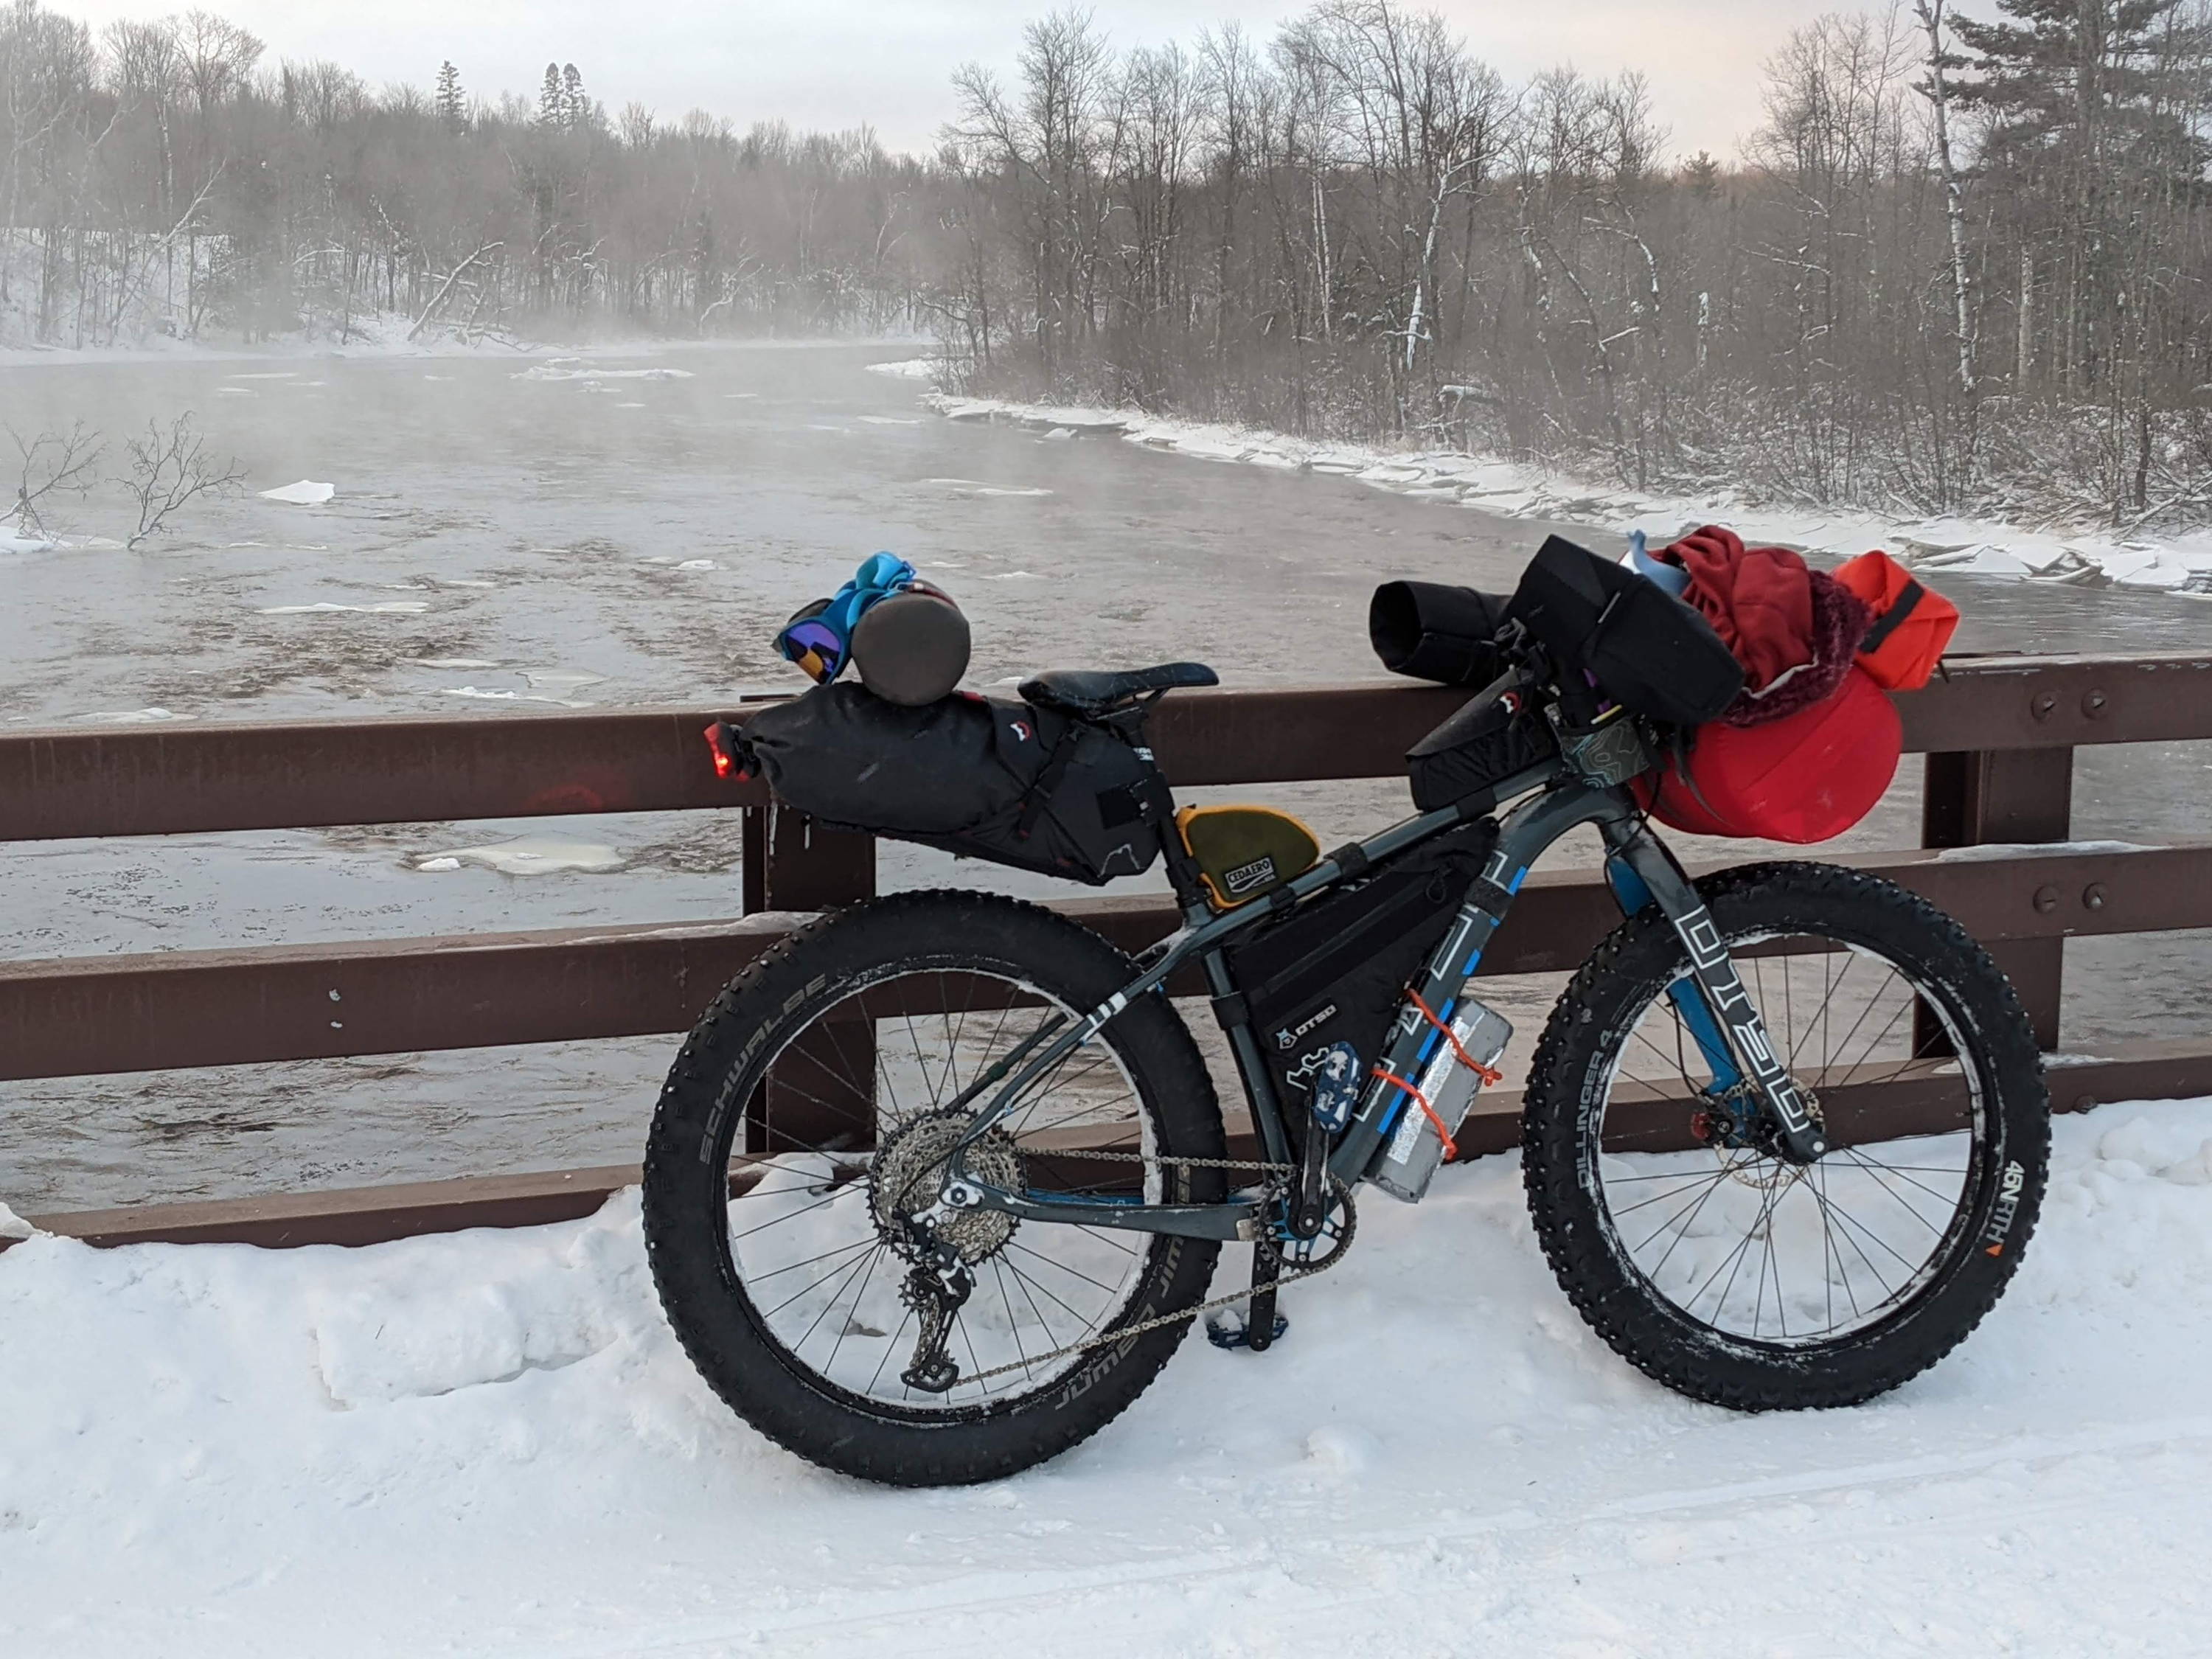 A fully-loaded bikepacking bike leans against a fence by the Chippewa River.